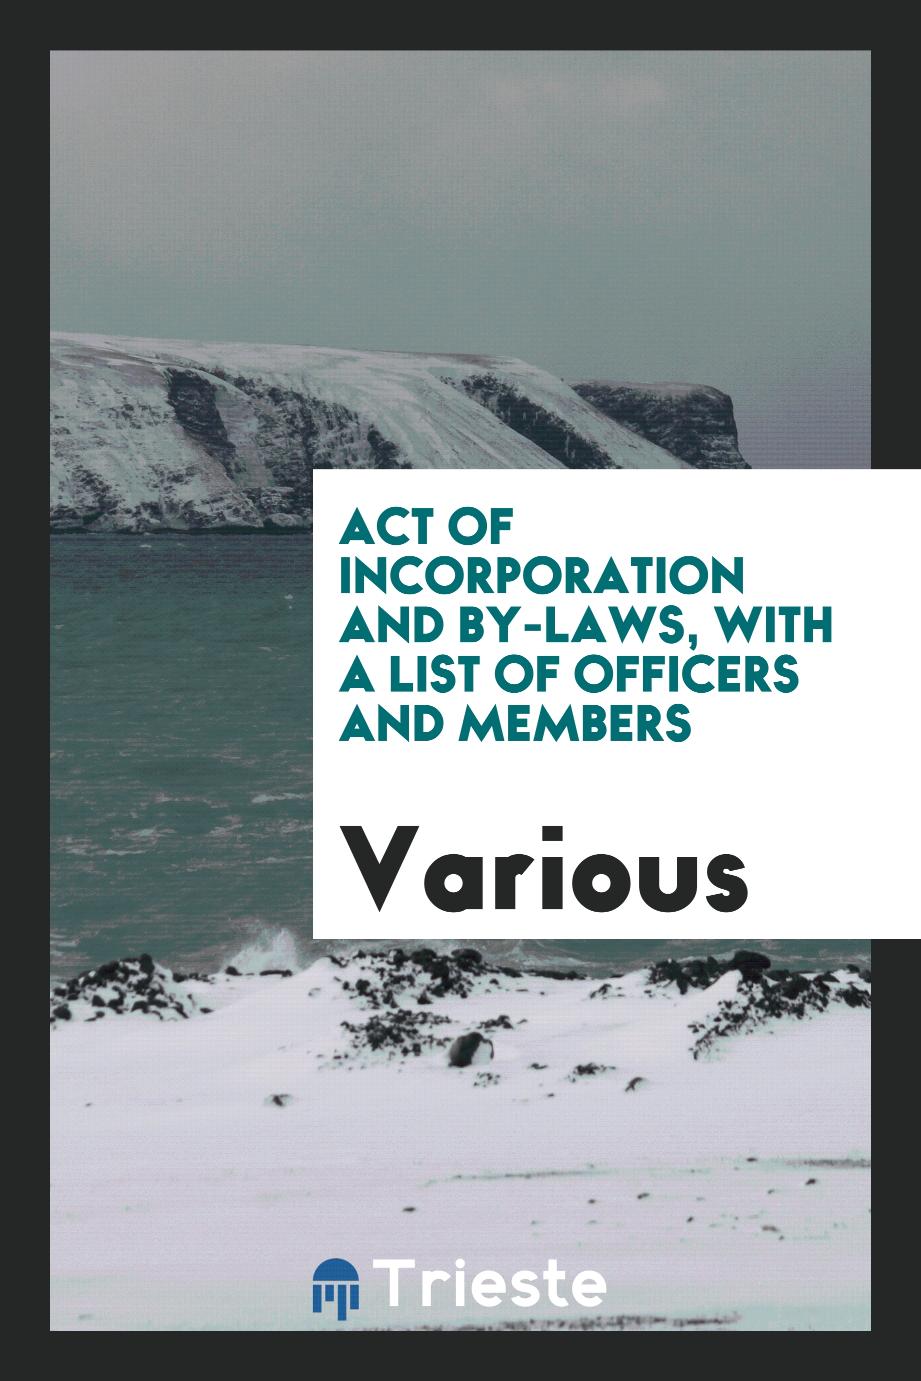 Act of Incorporation and By-laws, with a List of Officers and Members